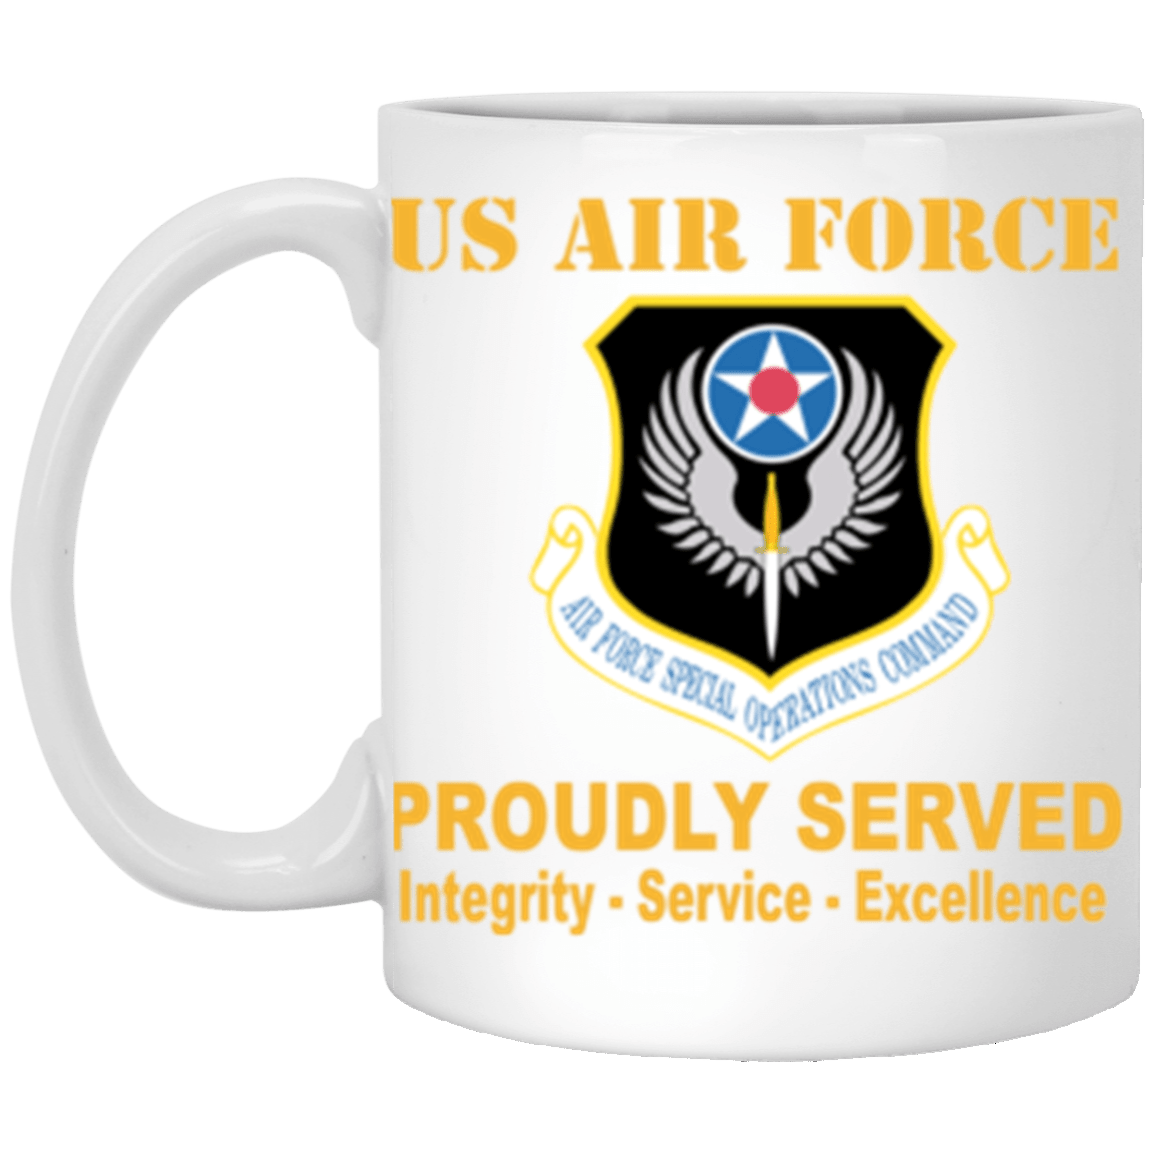 US Air Force Special Operations Command Proudly Served Core Values 11 oz. White Mug-Drinkware-Veterans Nation